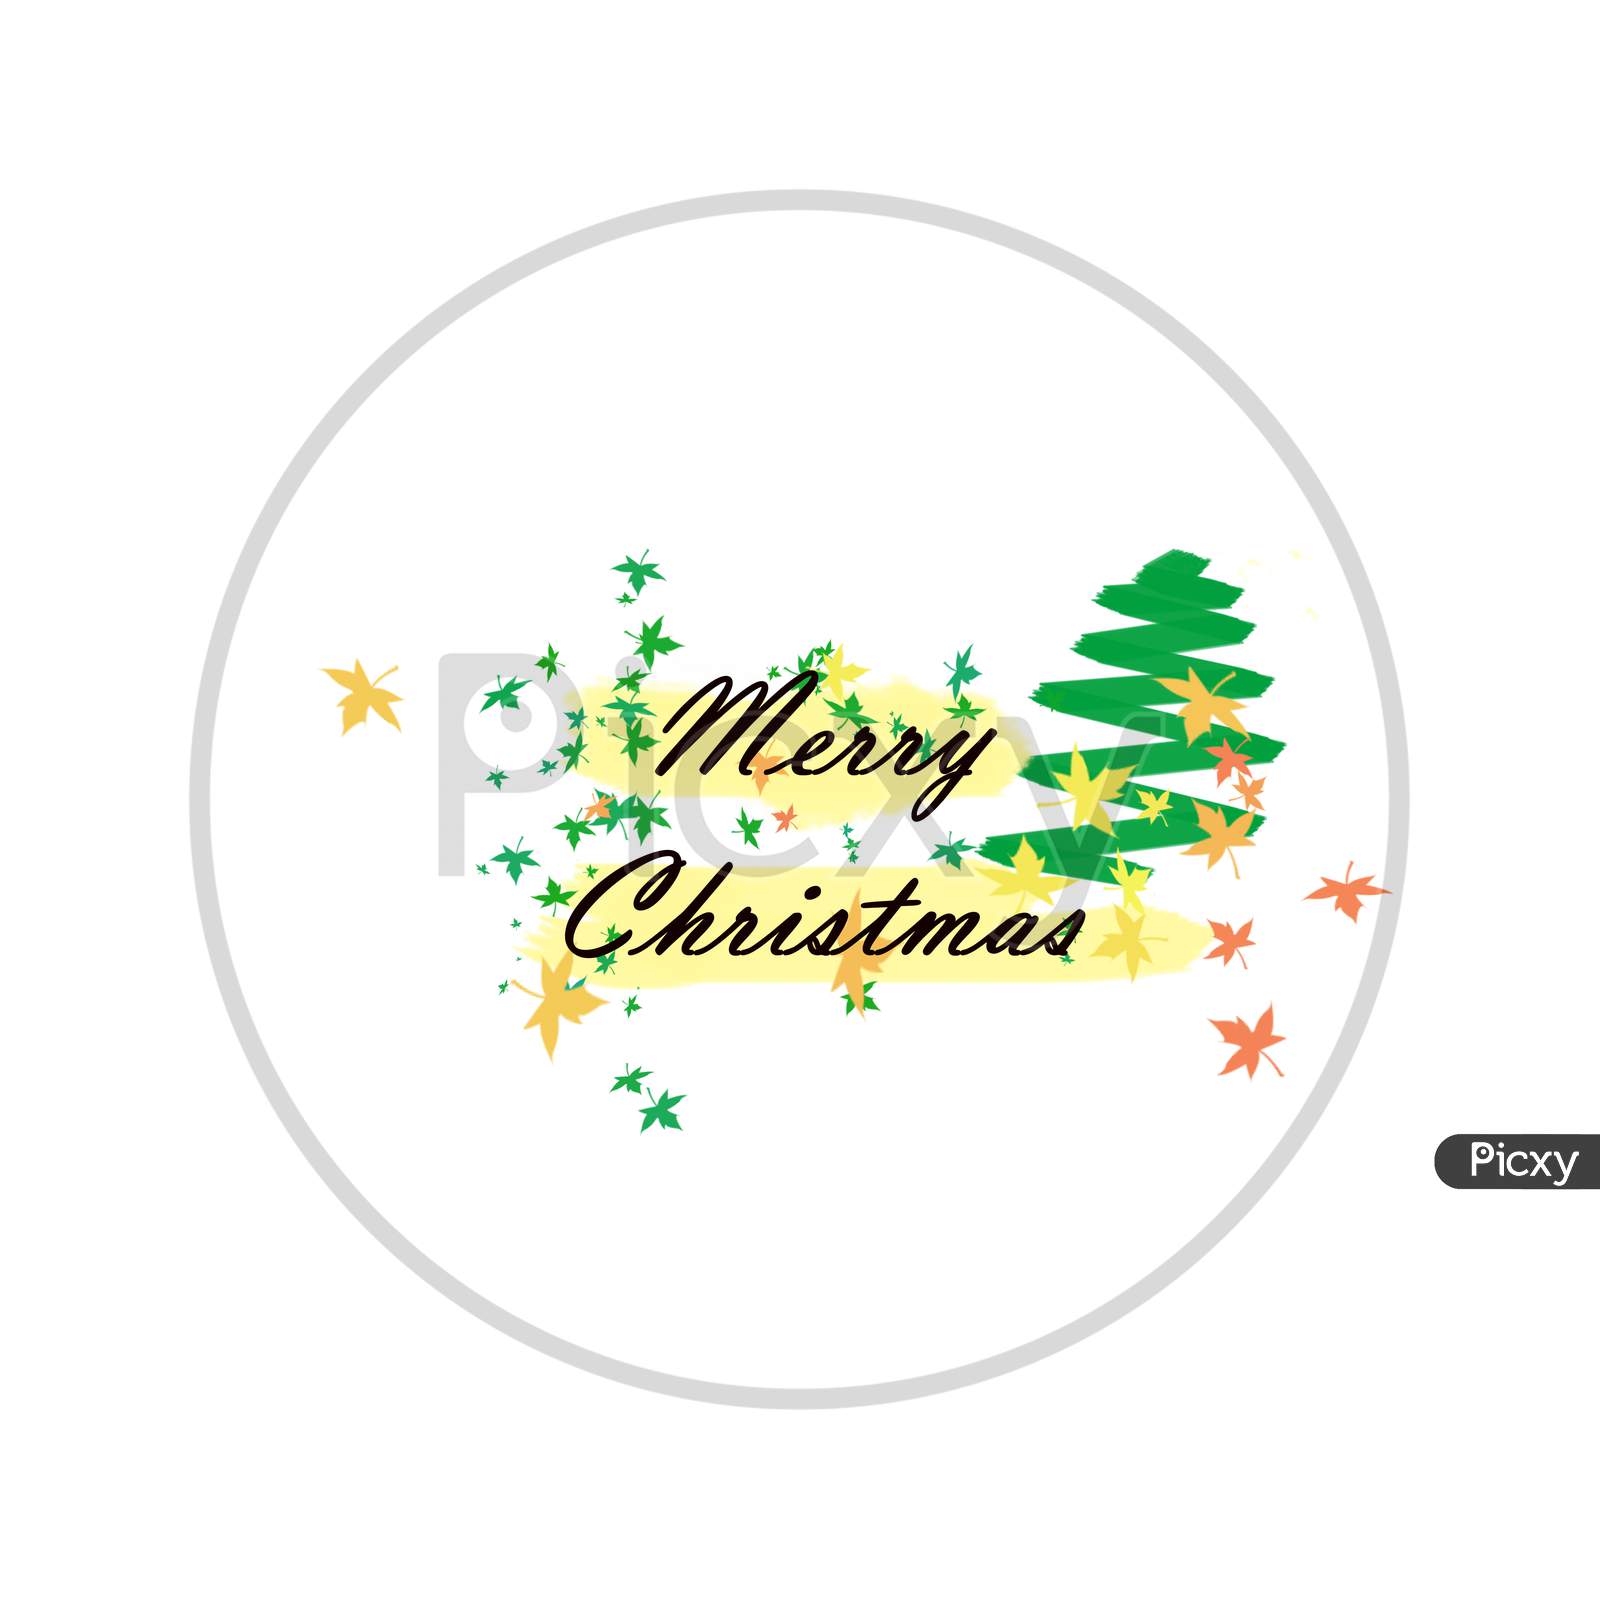 Merry Christmas Lettering Design Card Template And Creative Typography For Holiday Greeting Gift Poster.